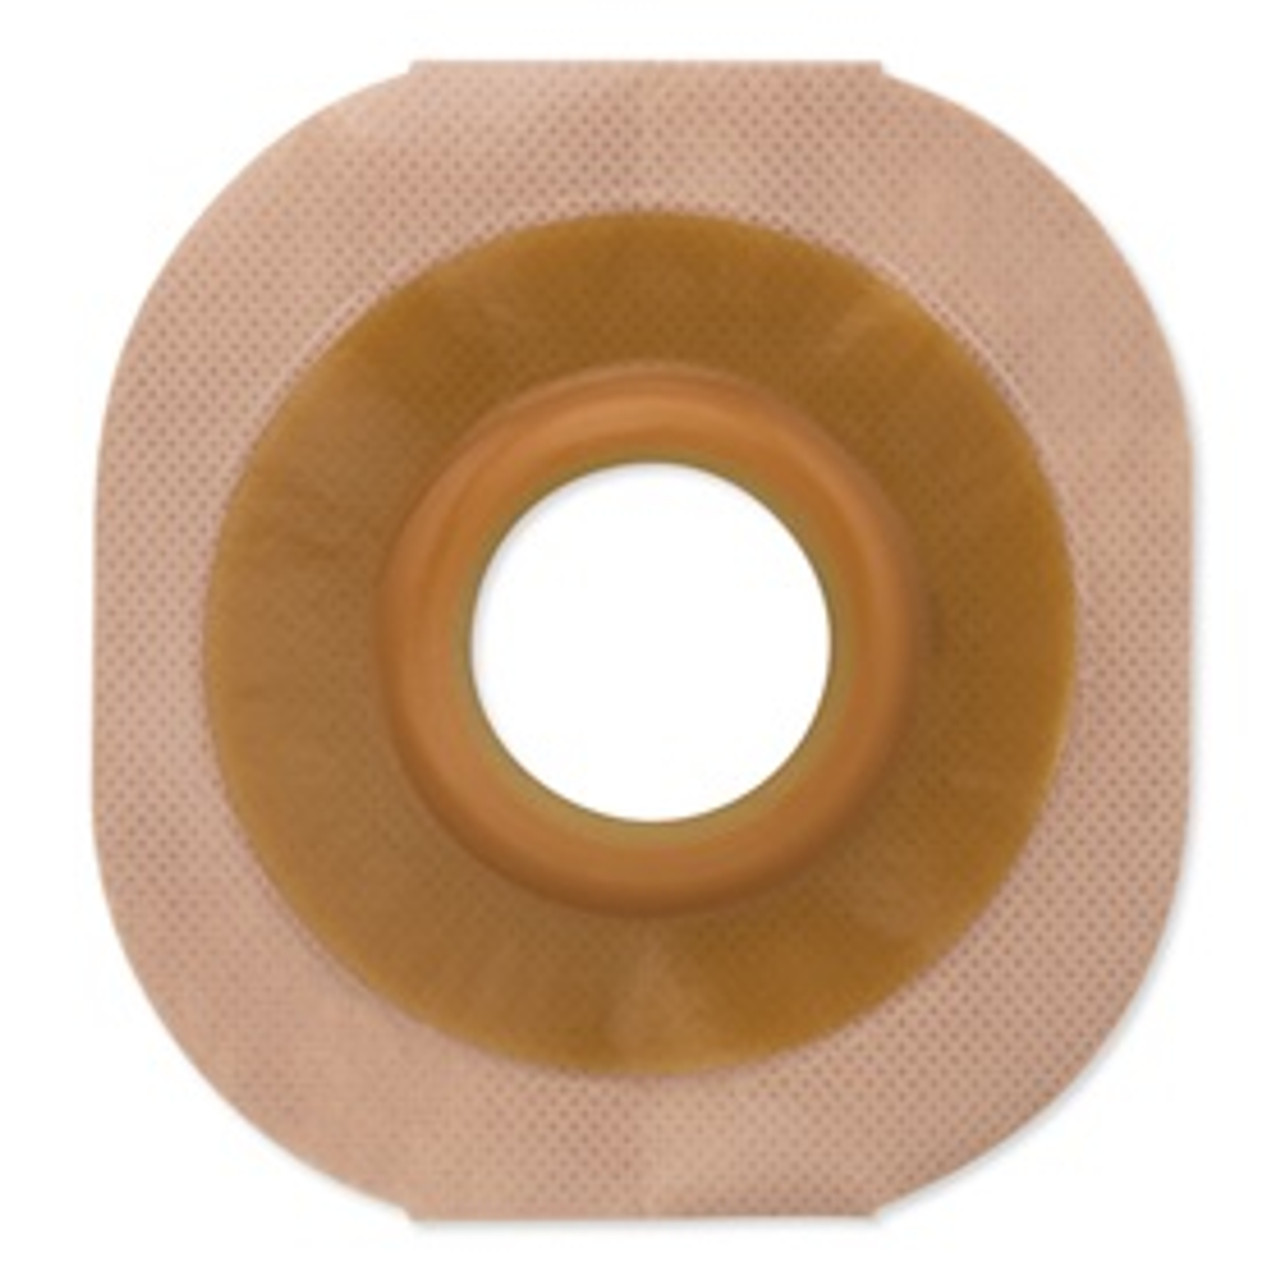 Hollister 13908 BX/5 NEW IMAGE FLEXTEND CONVEX SKIN Barrier WITH TAPERED BORDER, 2 1/4" (57MM) FLANGE, PRE-CUT 1 1/2" (38MM)